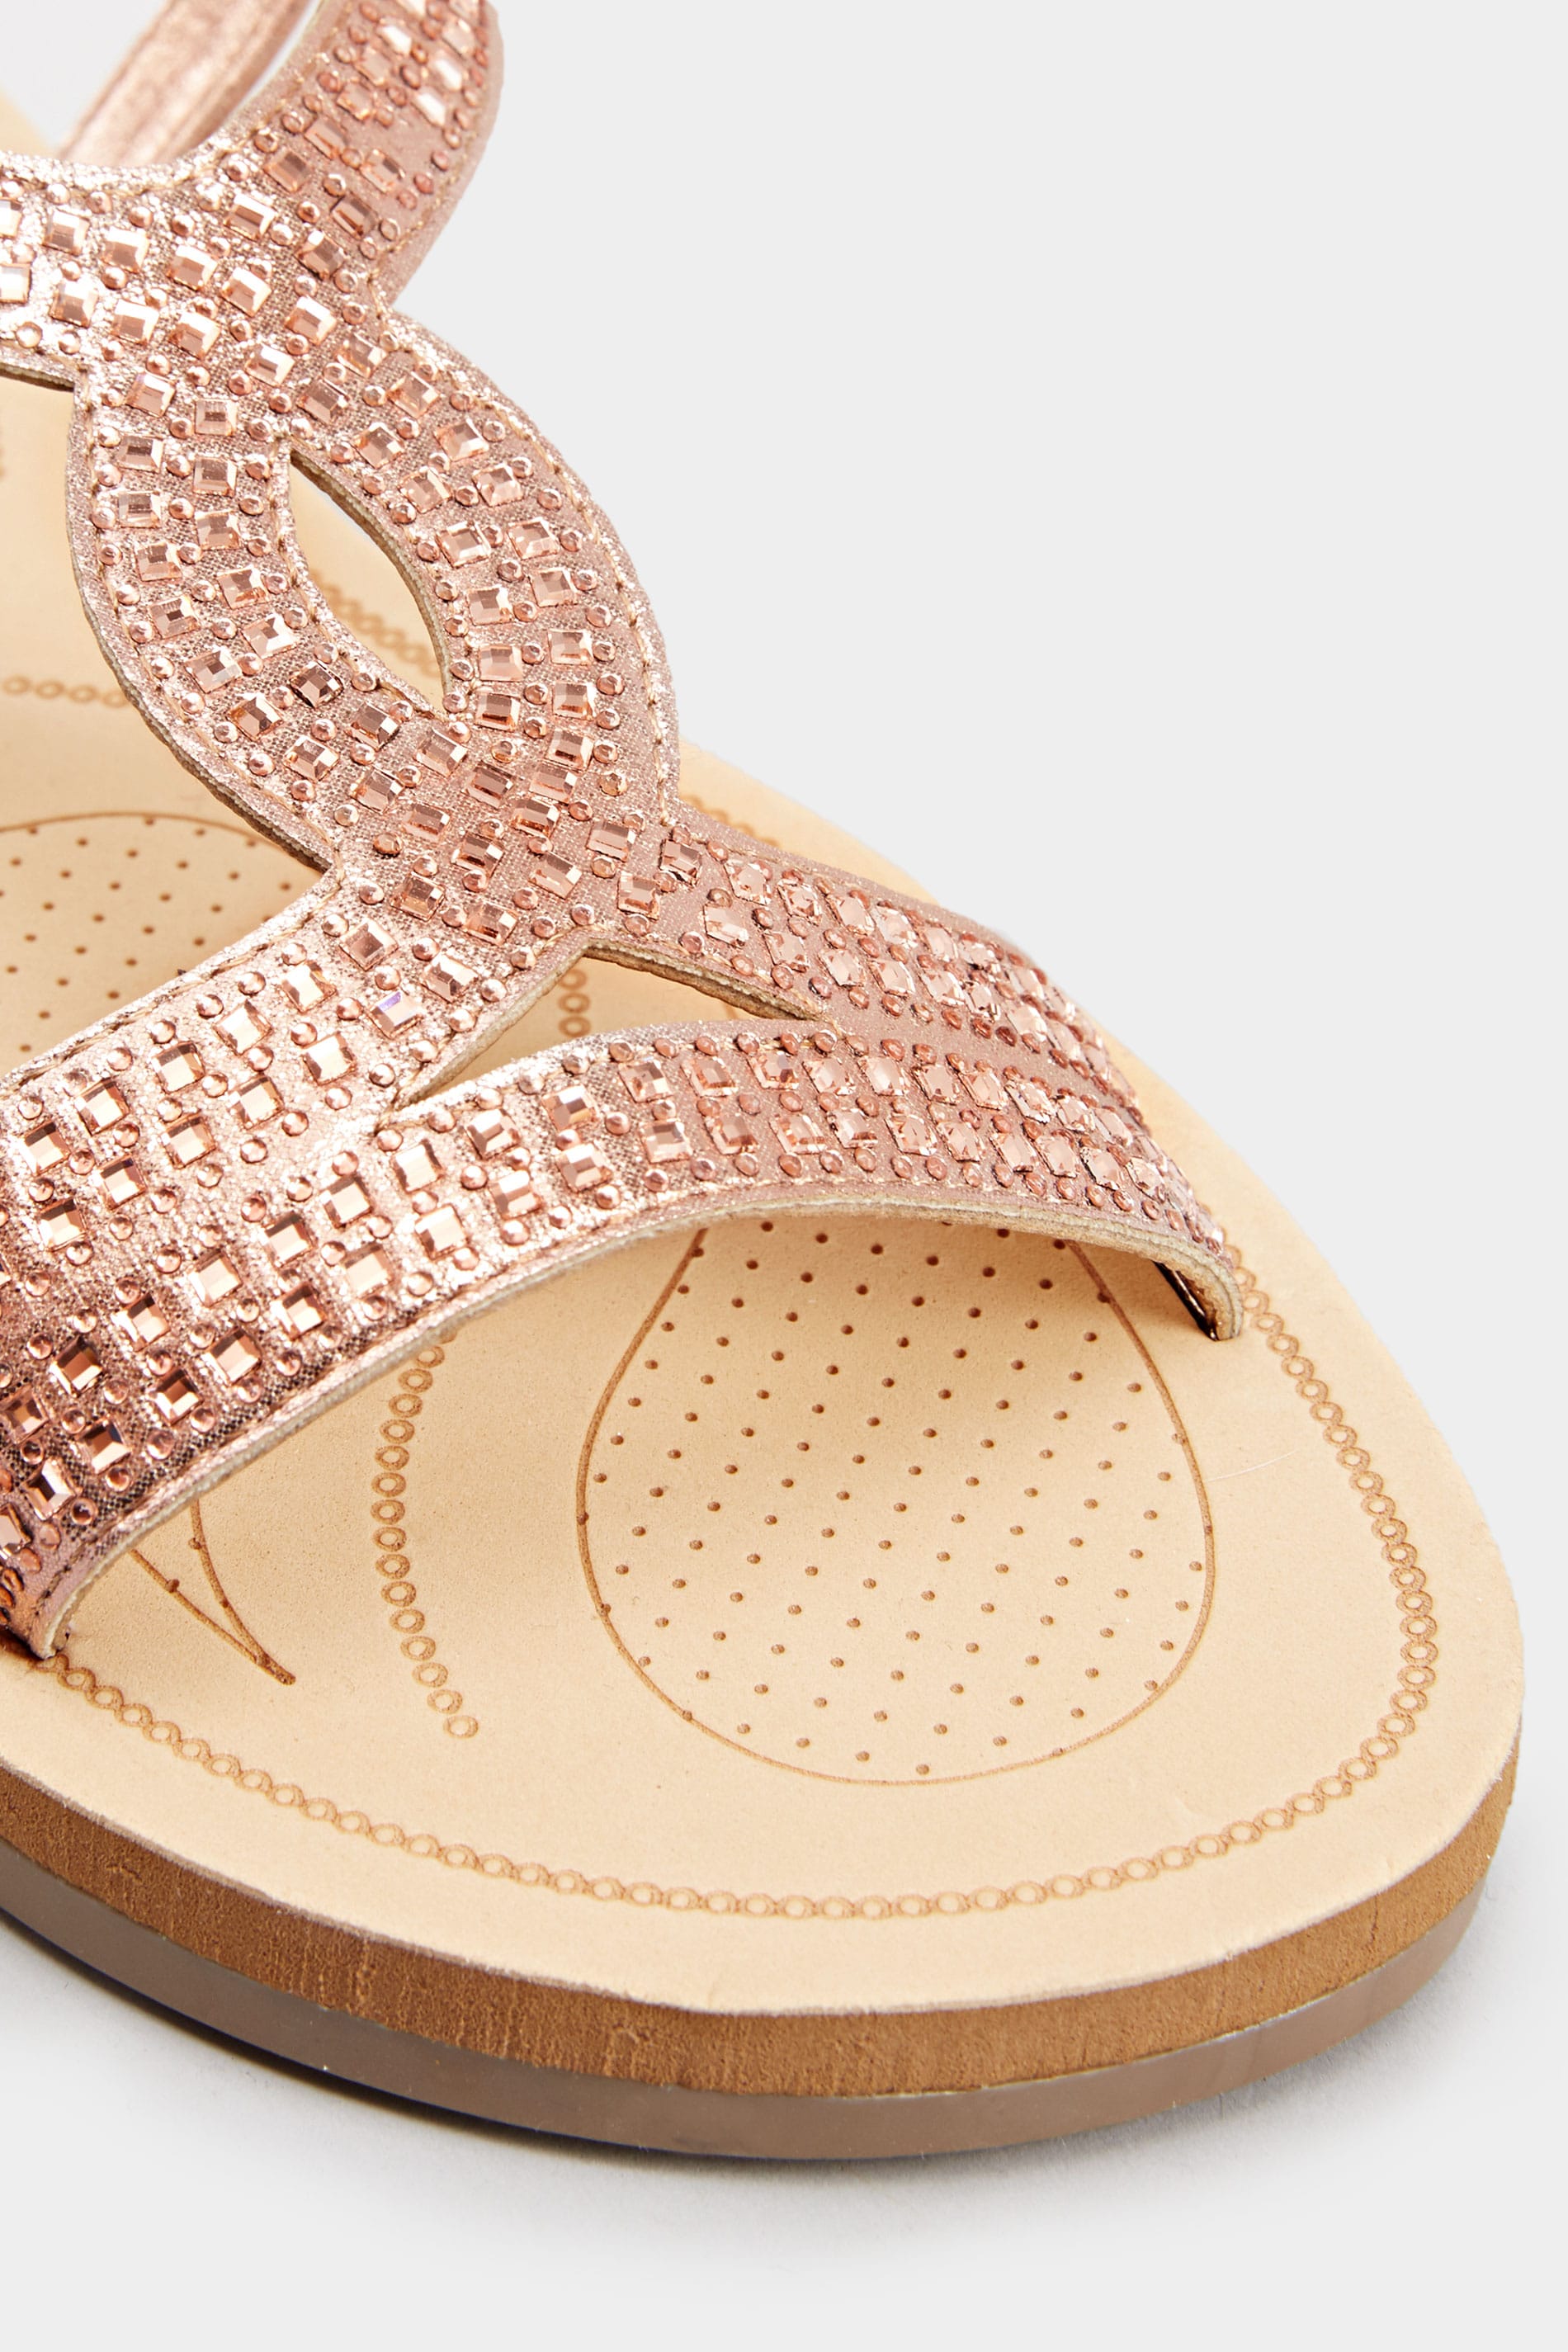 Wide Fitting Rose Gold Diamante Flower Sandals | Sizes 